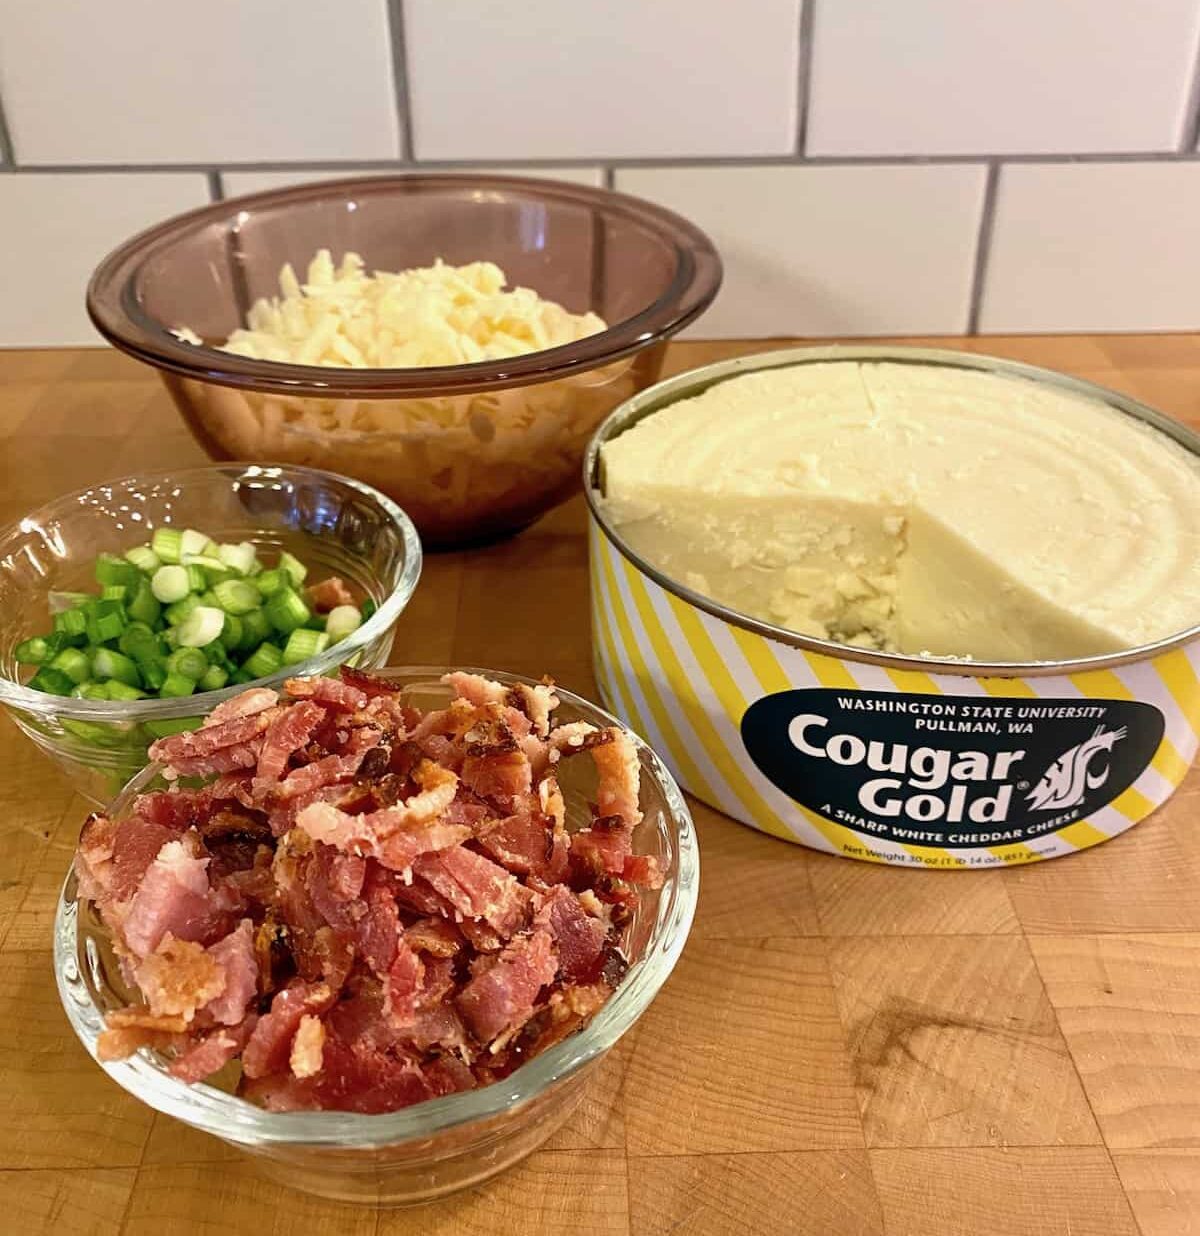 Small bowls of cooked, diced bacon, green onions and shredded cheese with an opened can of Cougar Gold on the side.